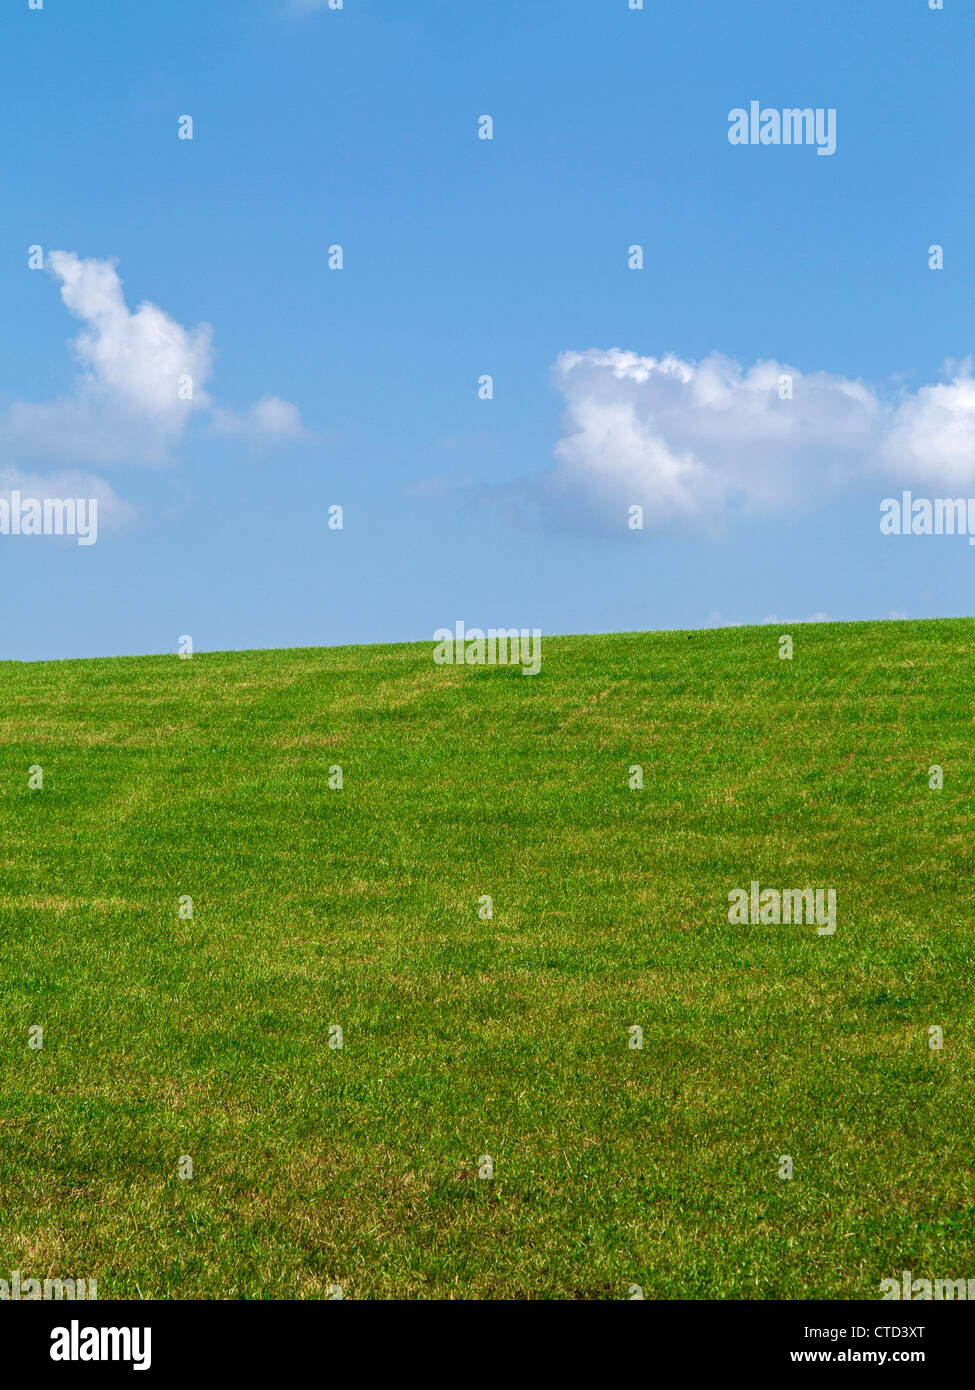 Rural scene of a grass field and blue sky with a few light clouds Stock Photo